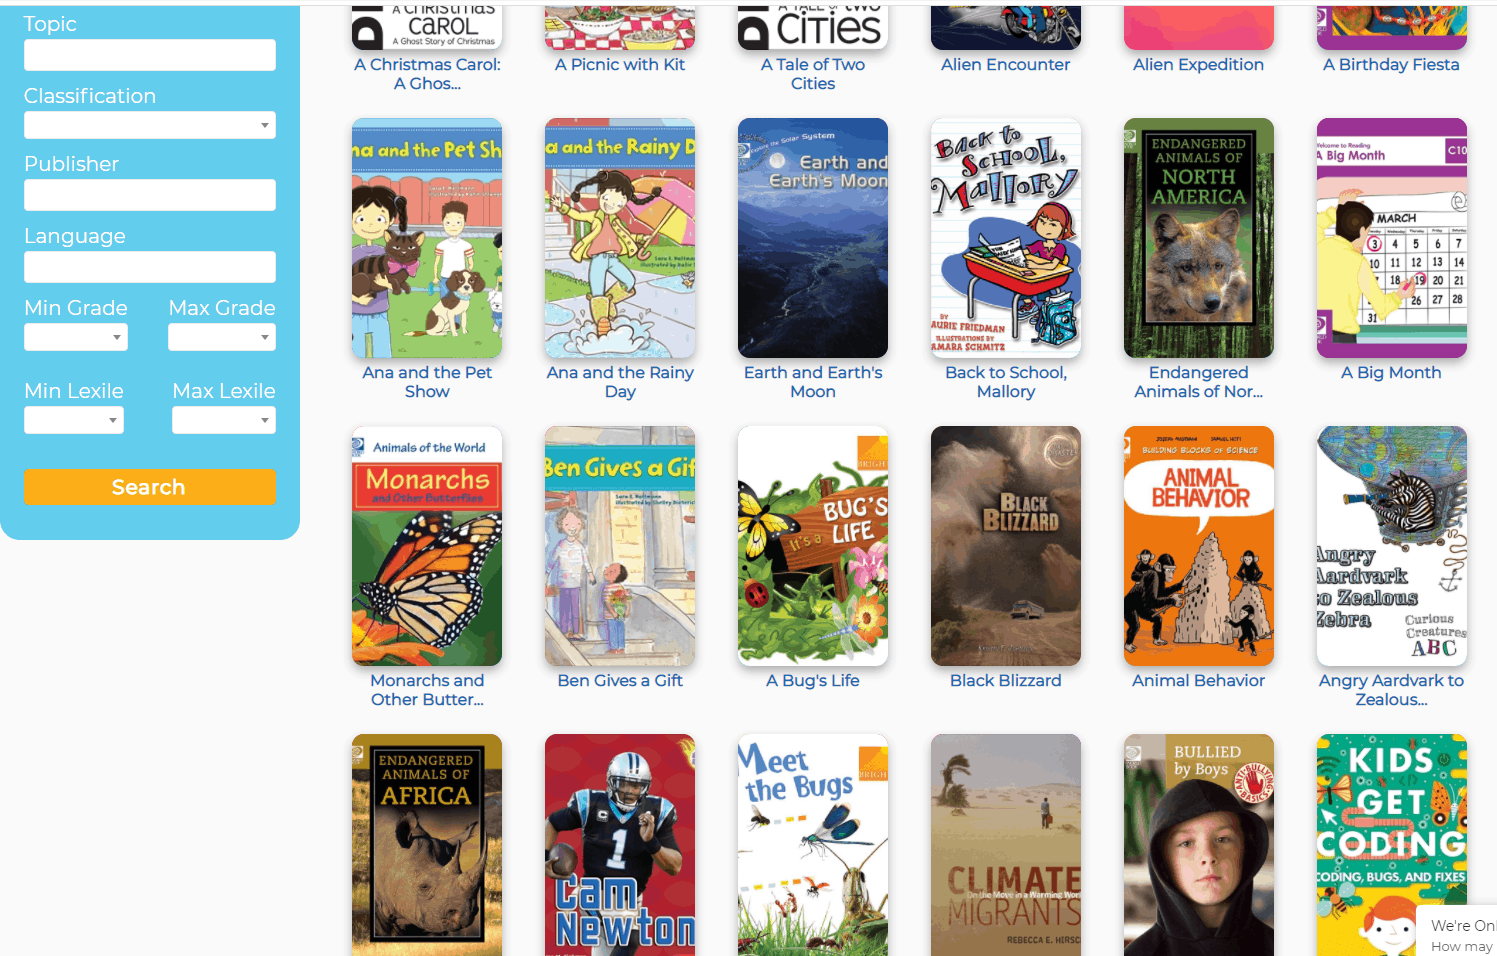 Image of book covers in LightSail for Homeschooler's library